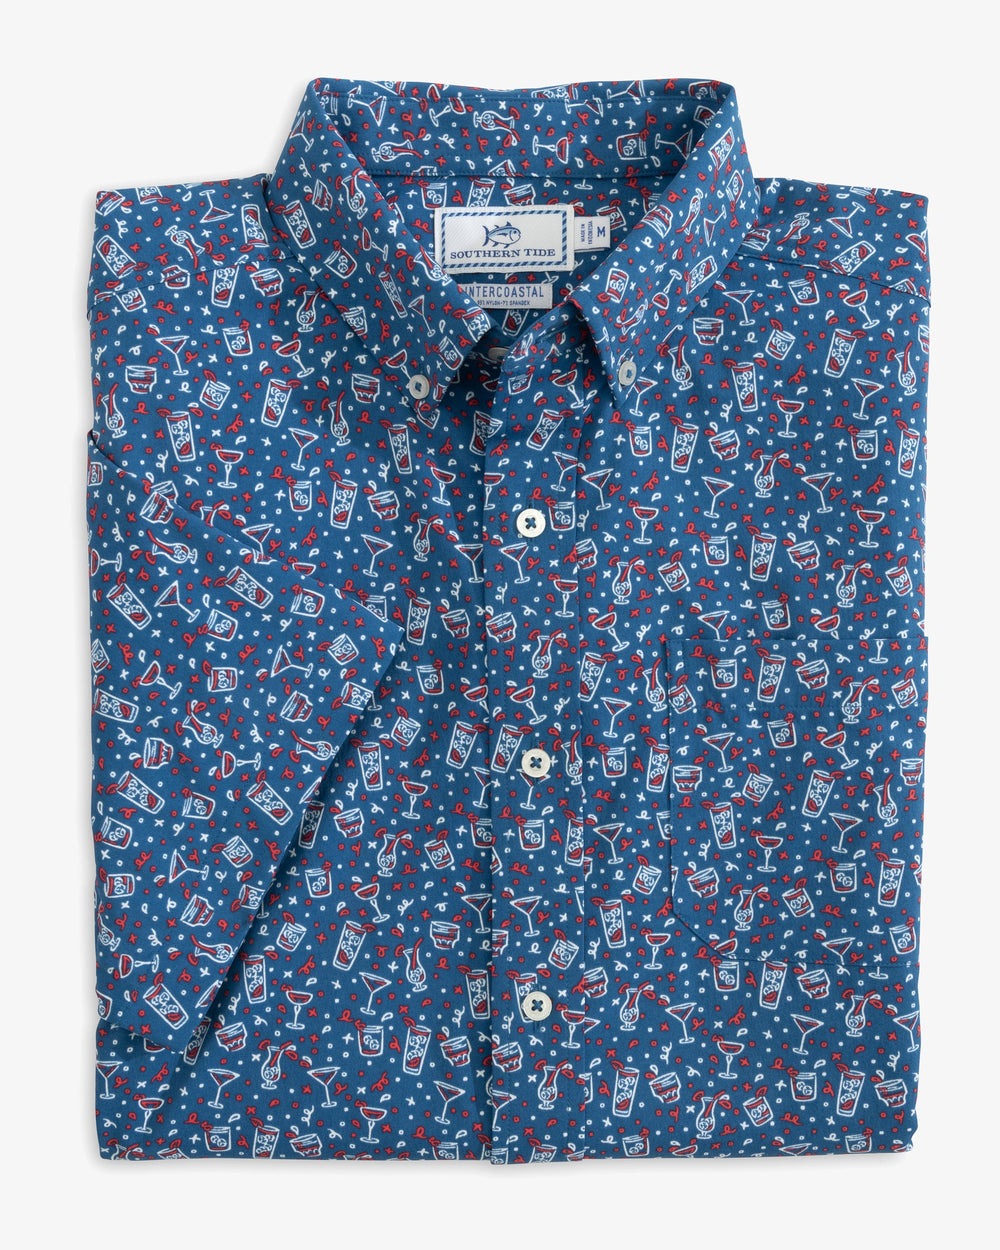 The folded view of the Men's Let the Party Be-Gin Short Sleeve Button Down Shirt by Southern Tide - Deep Water